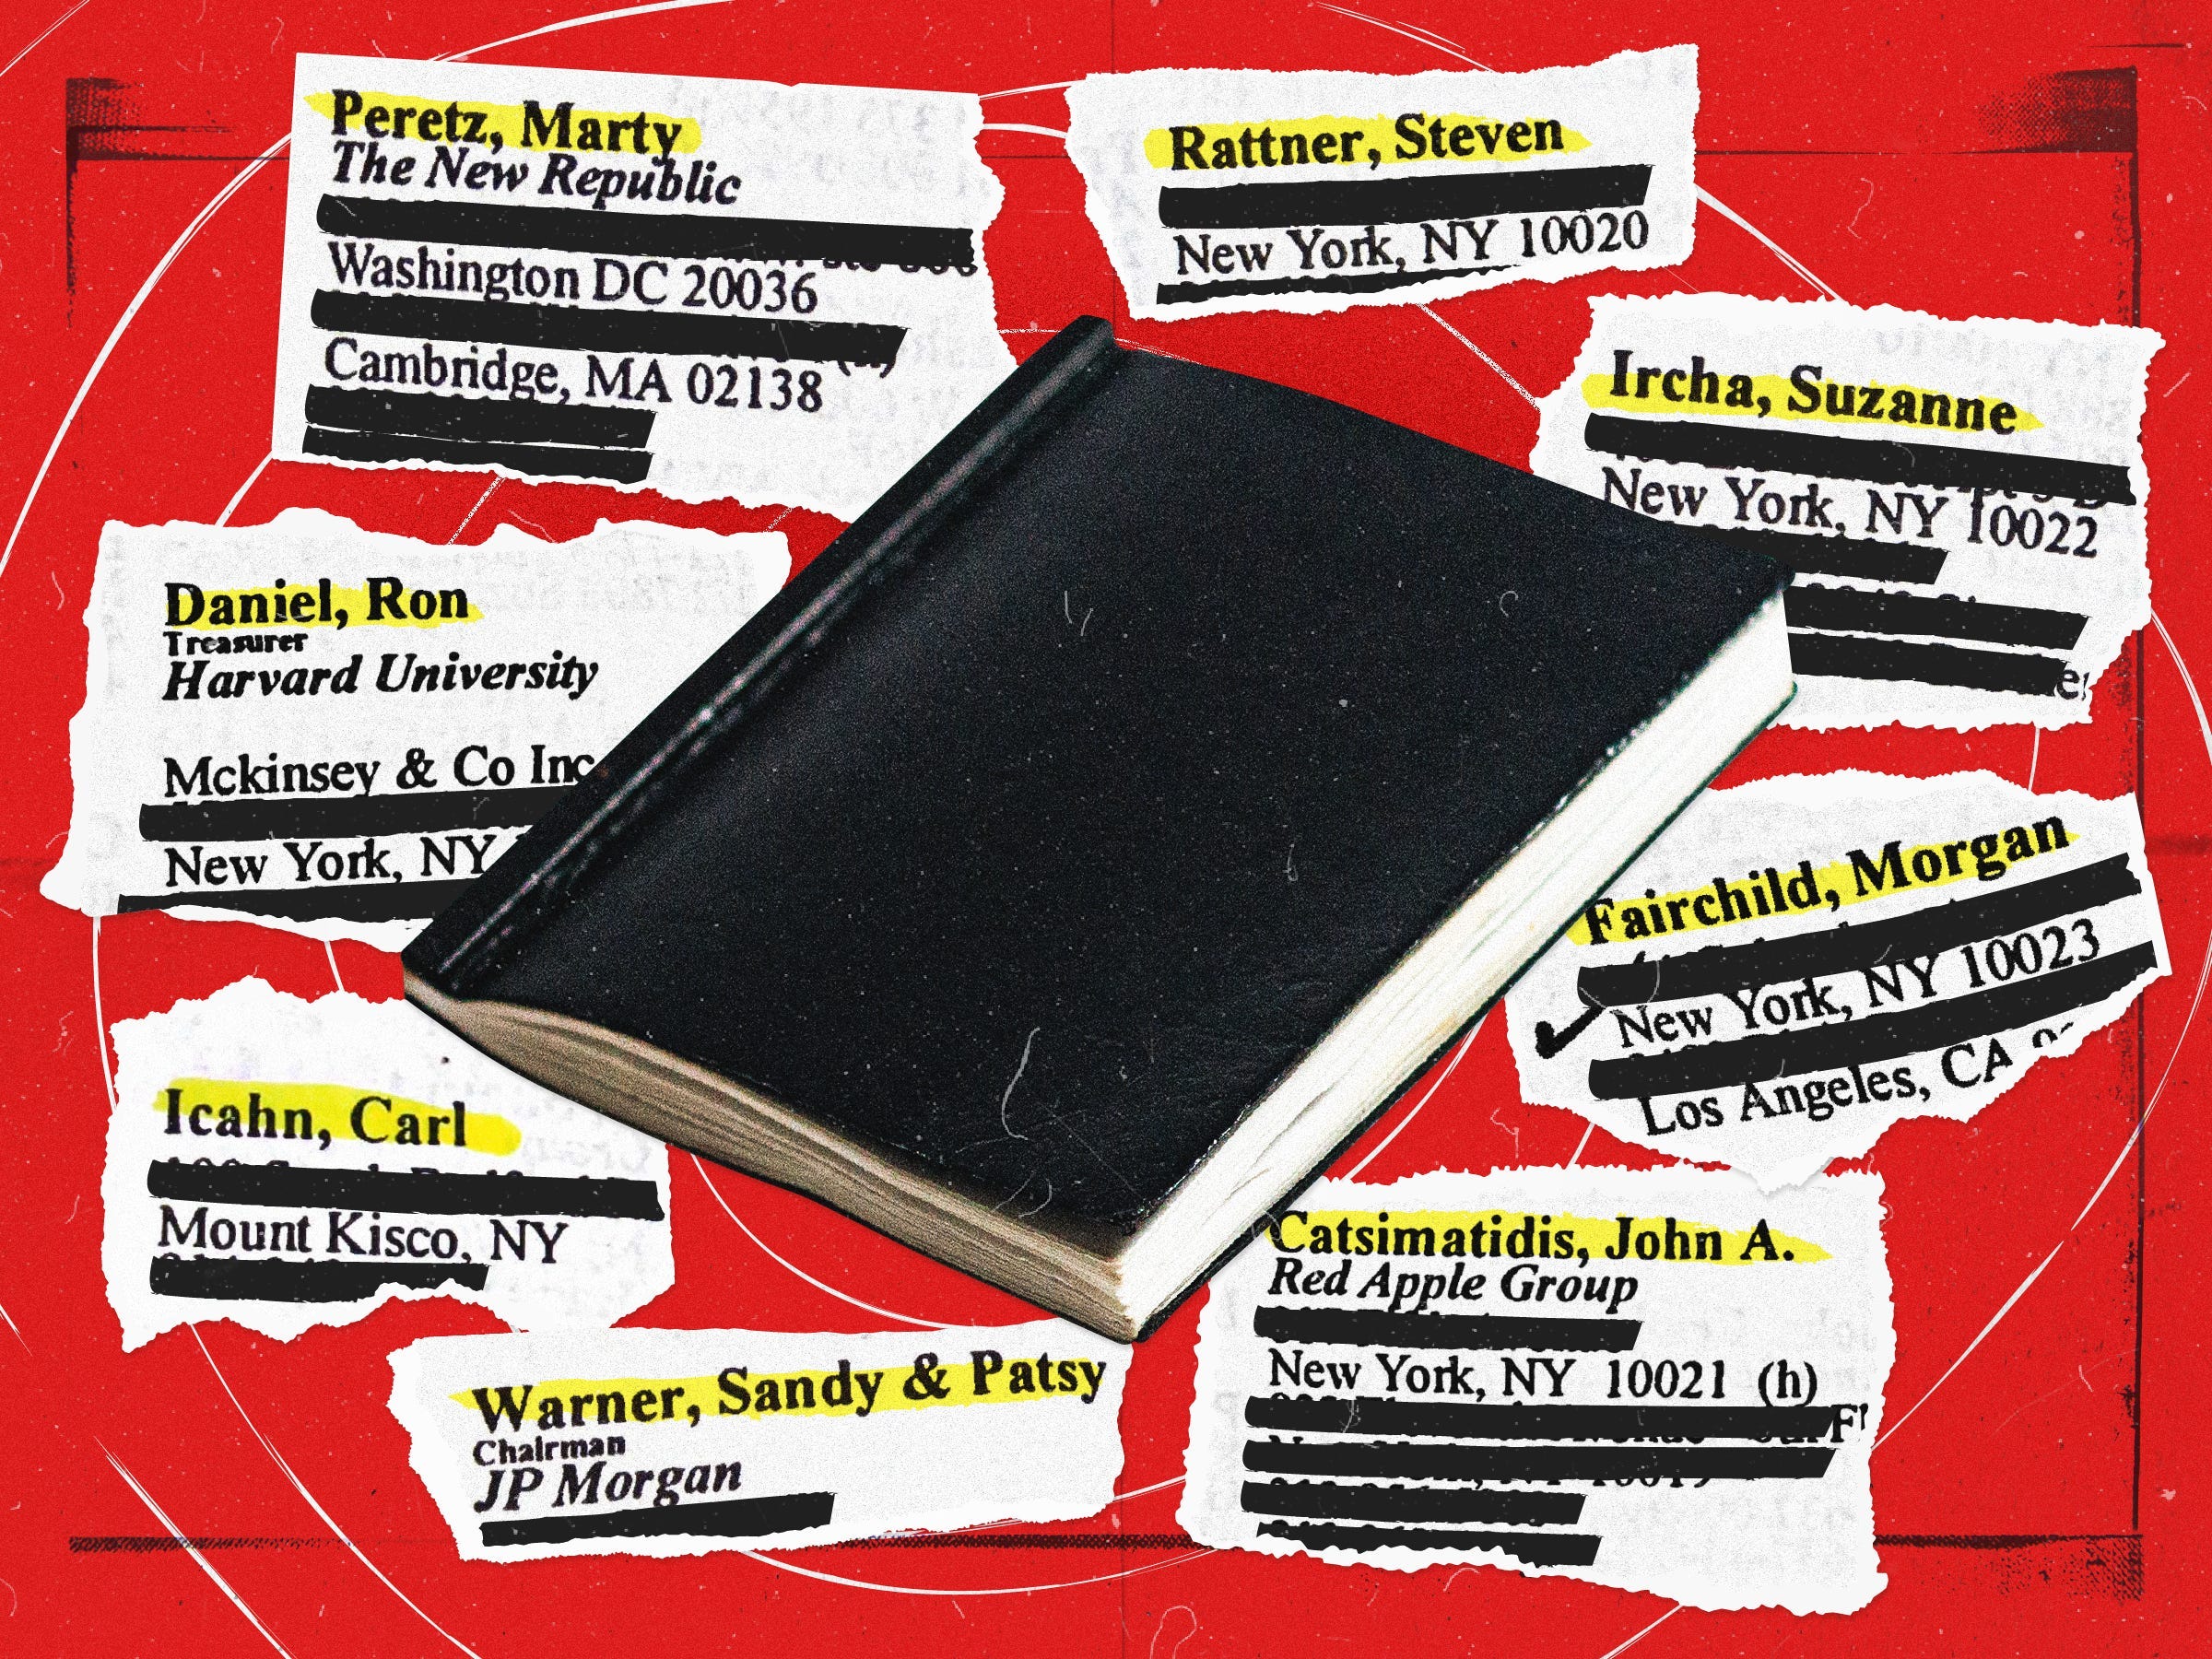 Jeffrey Epstein's address book surrounded by ripped pieces of paper with select names from the book on a red background